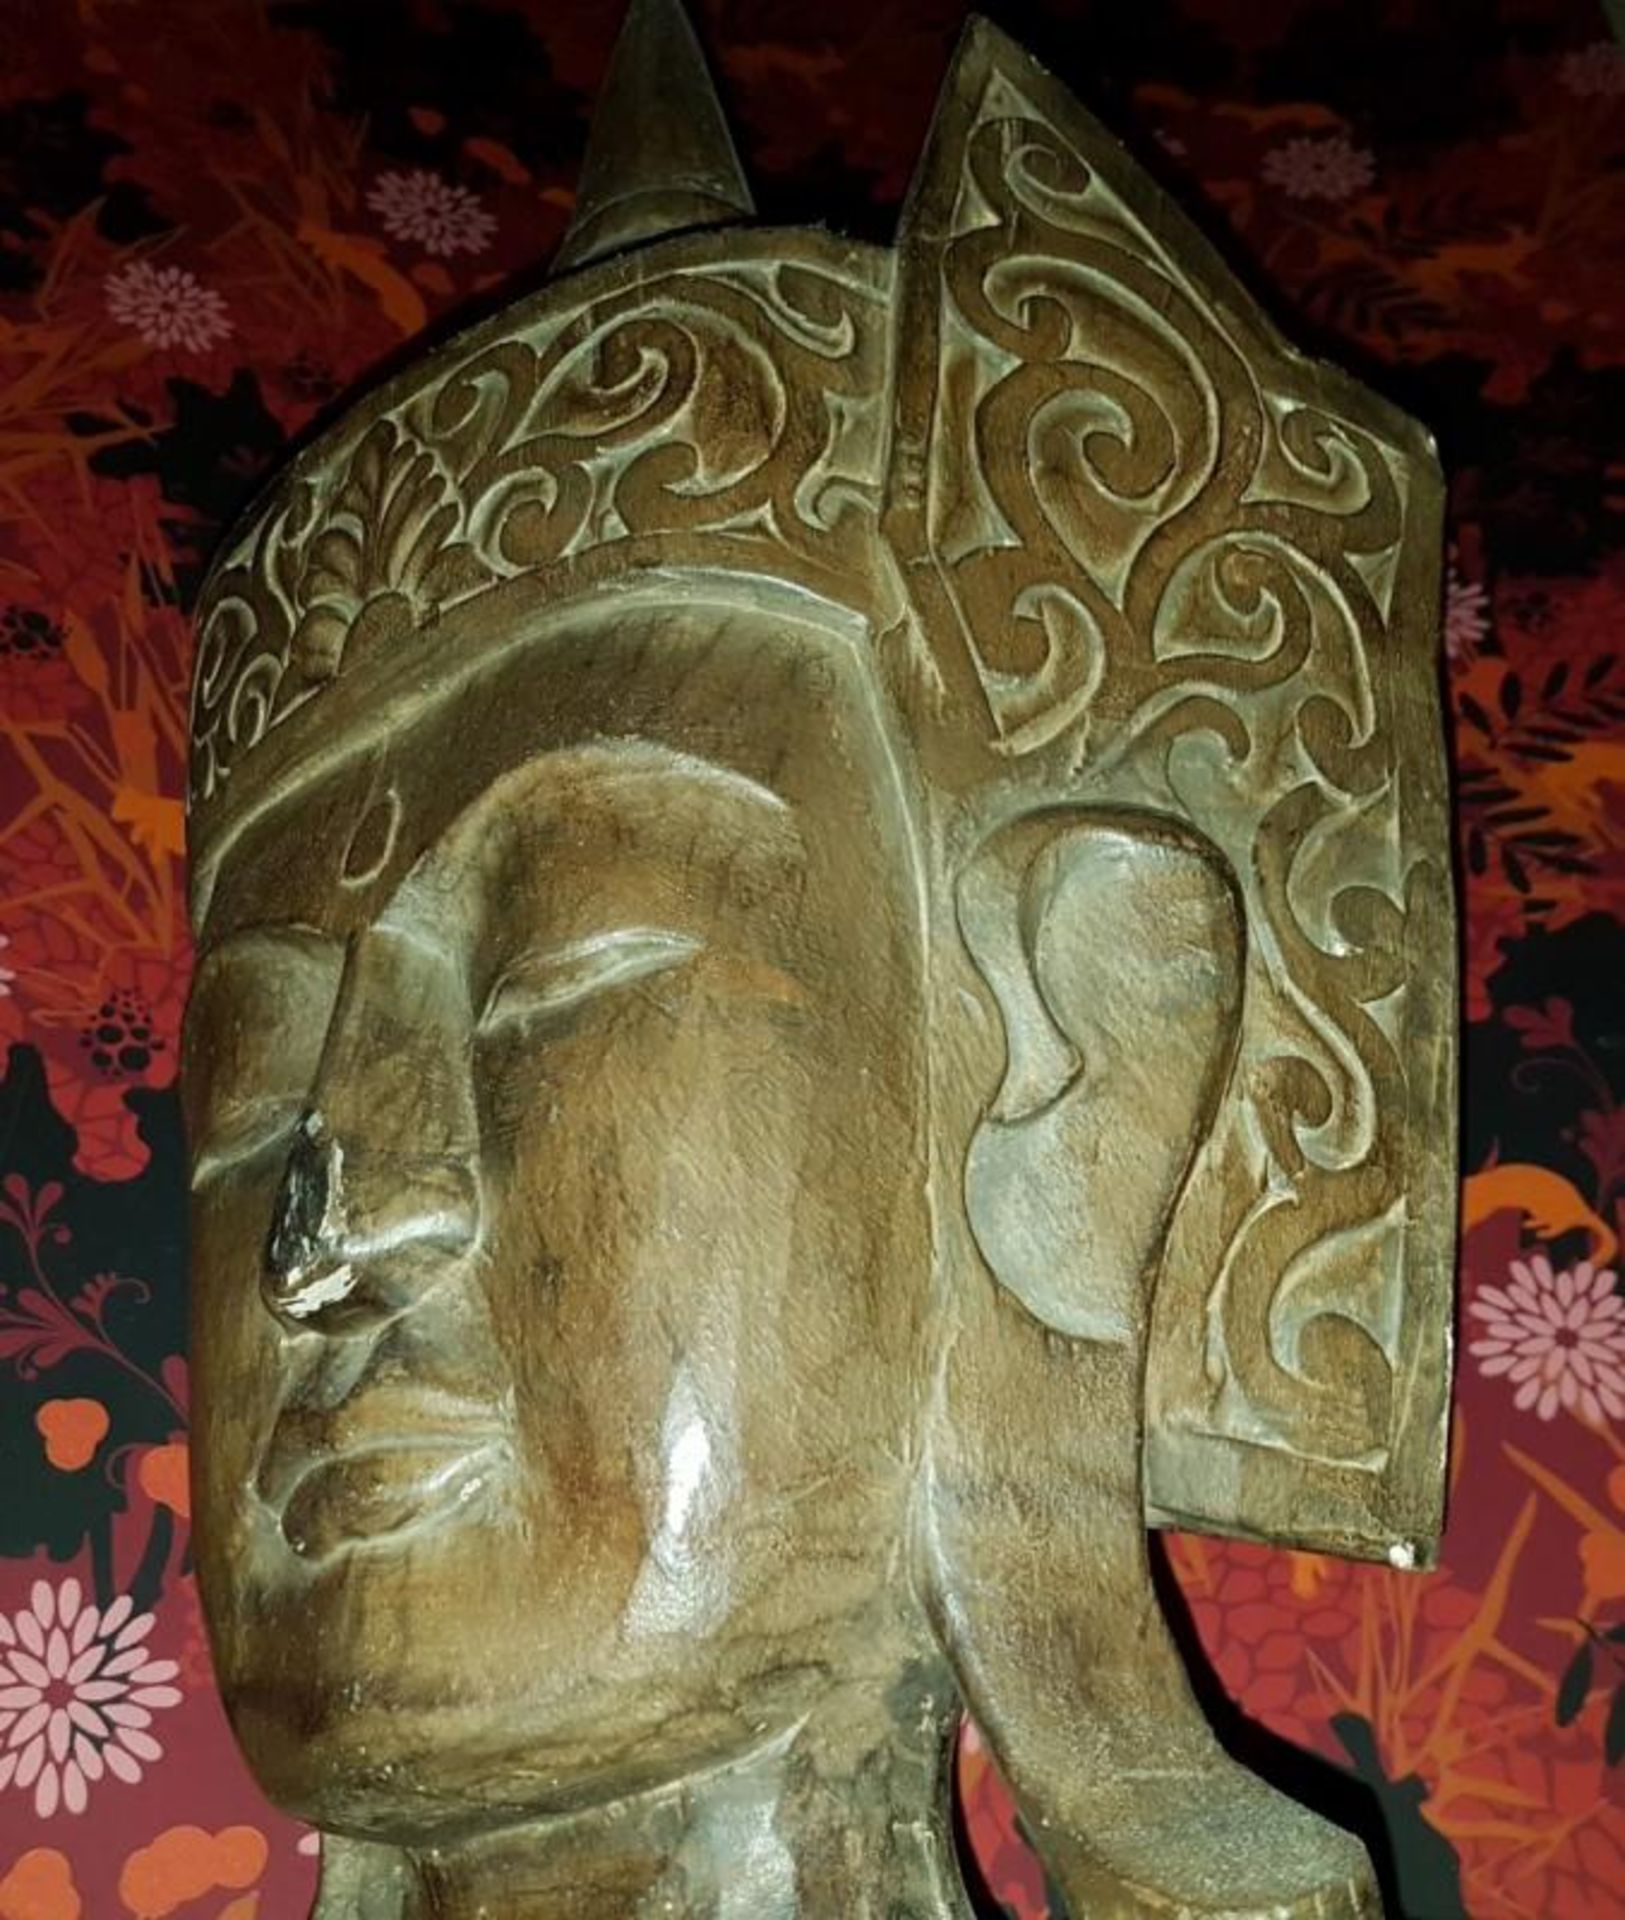 1 x Freestanding Buddha Statue - Over 8ft Tall - Natural Carved Wood Finish - H270 x W95 x D40 cms - - Image 5 of 8